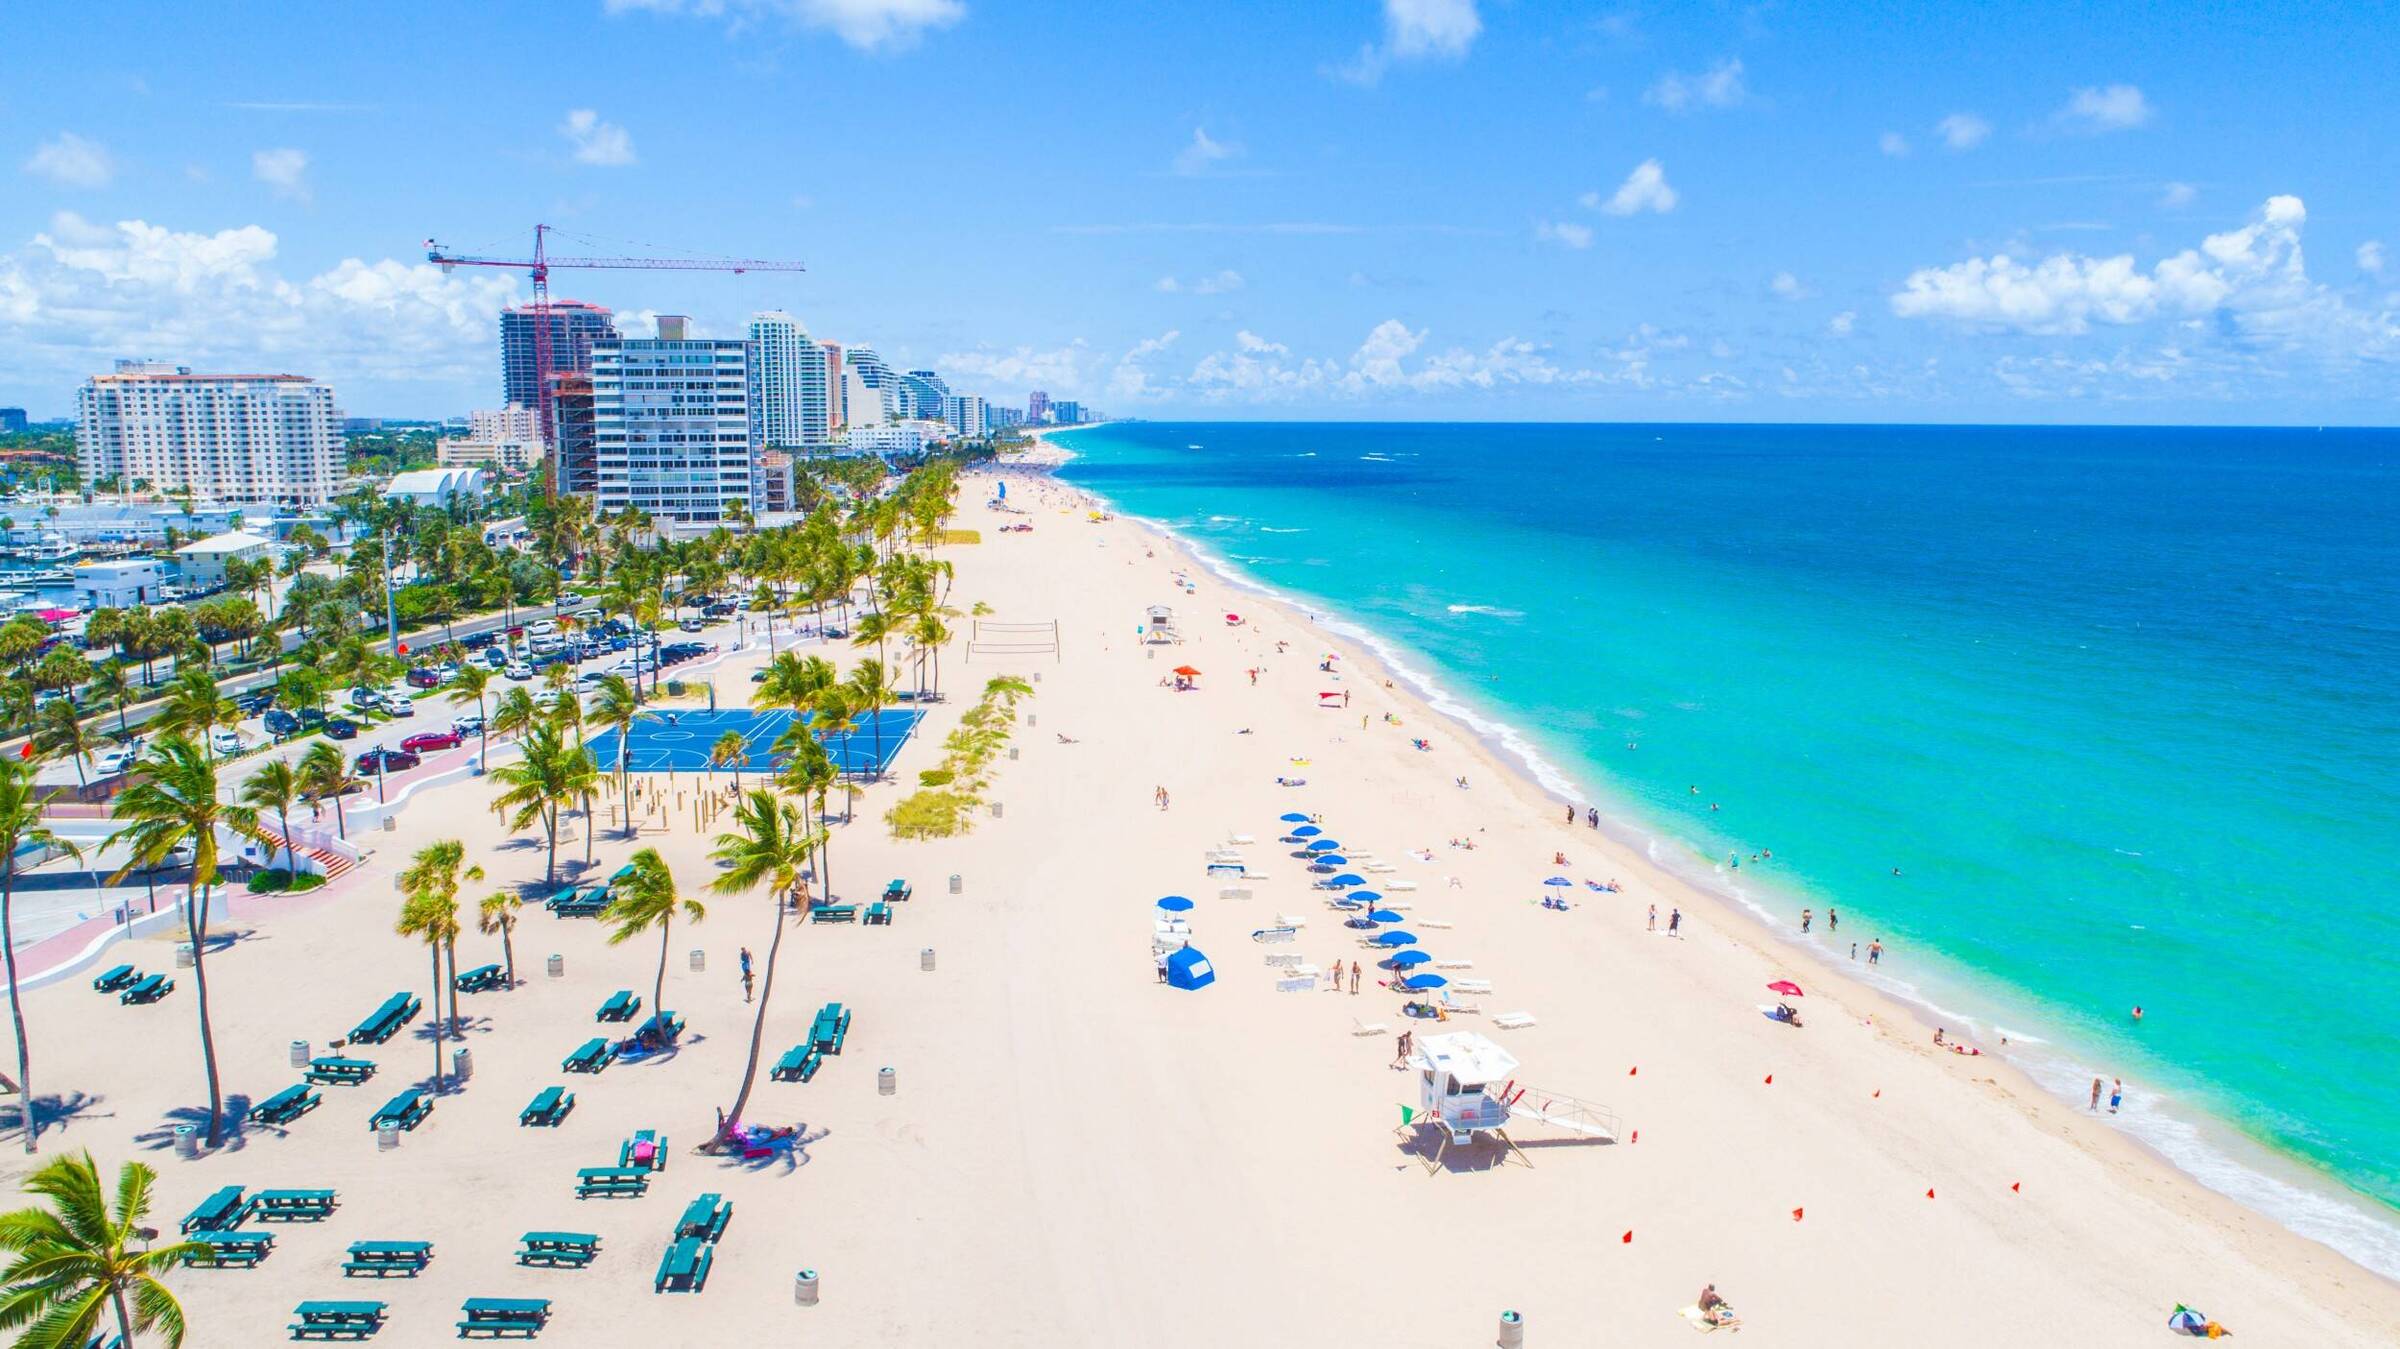 Four ways to experience Fort Lauderdale, Florida